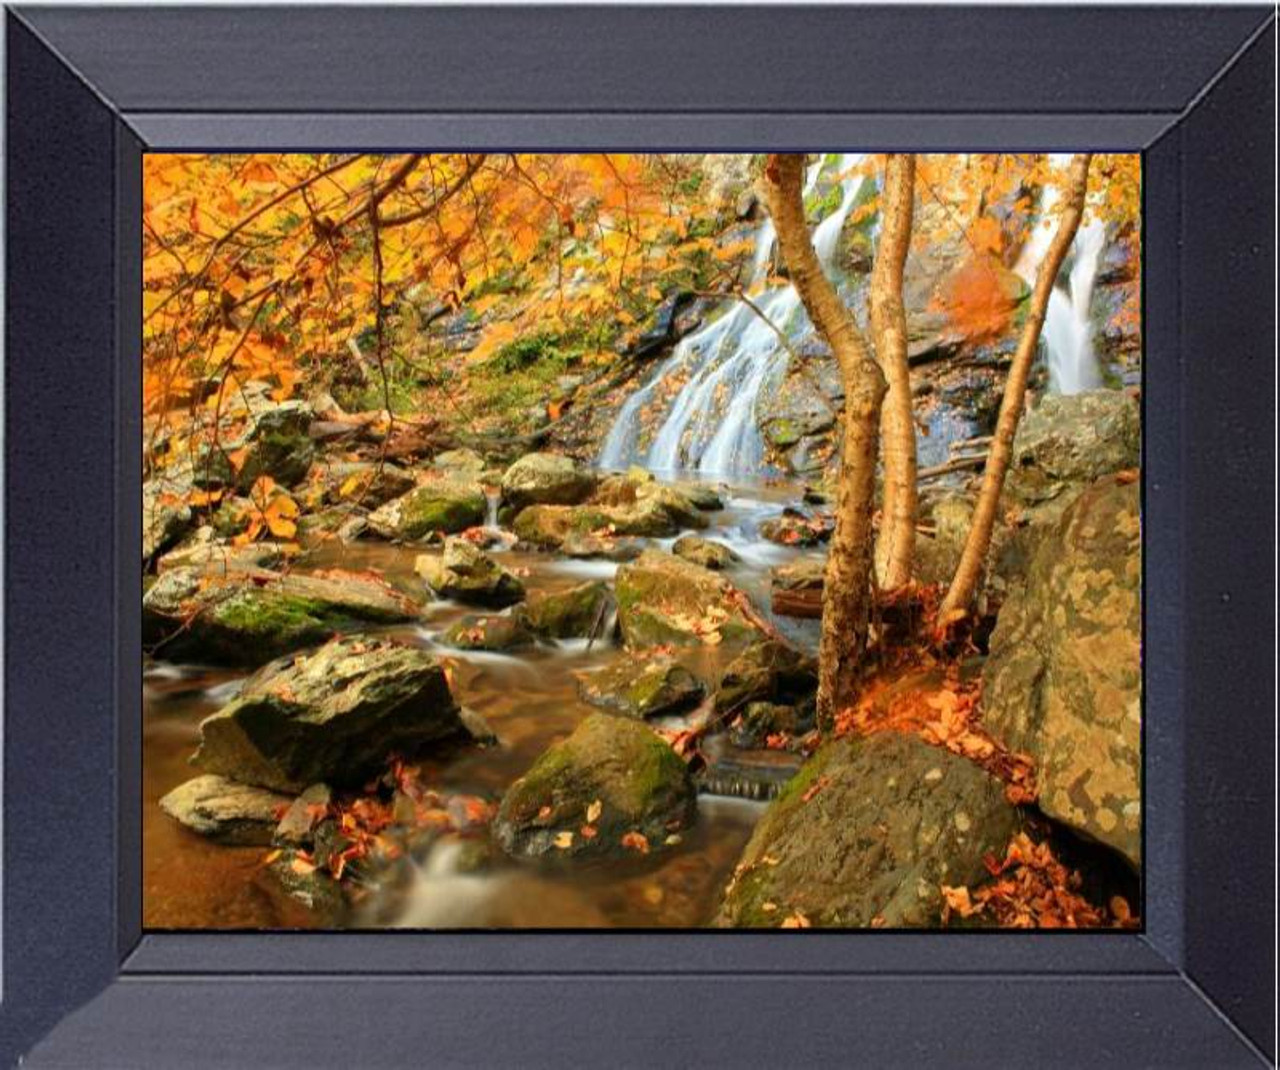 Waterfall In The Appalachian Mountains In The Autumn. Framed Art Photograph Print Framed Print